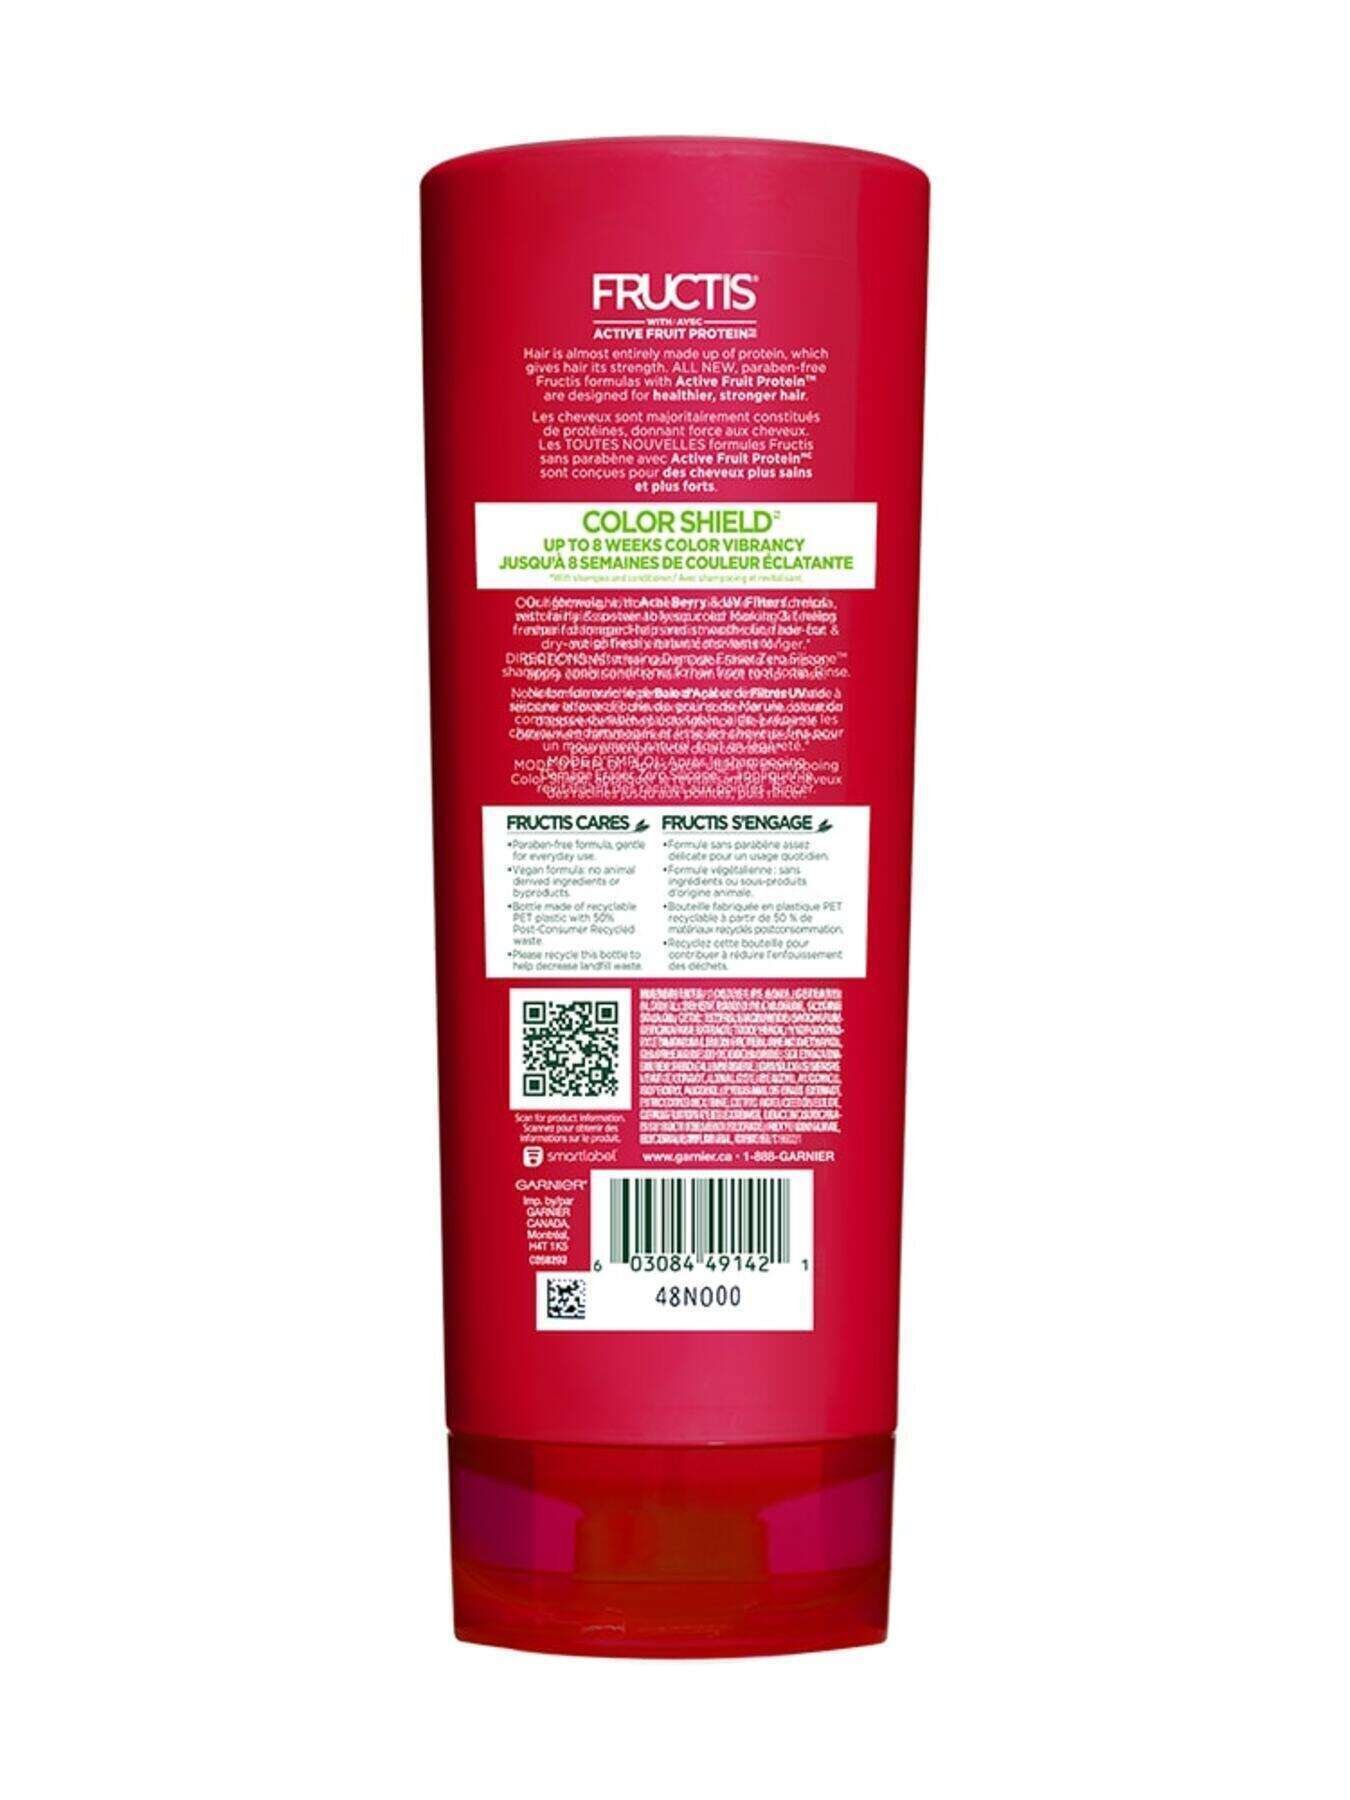 garnier hair conditioner fructis color shield fortifying conditioner 354 ml 603084491421 t2